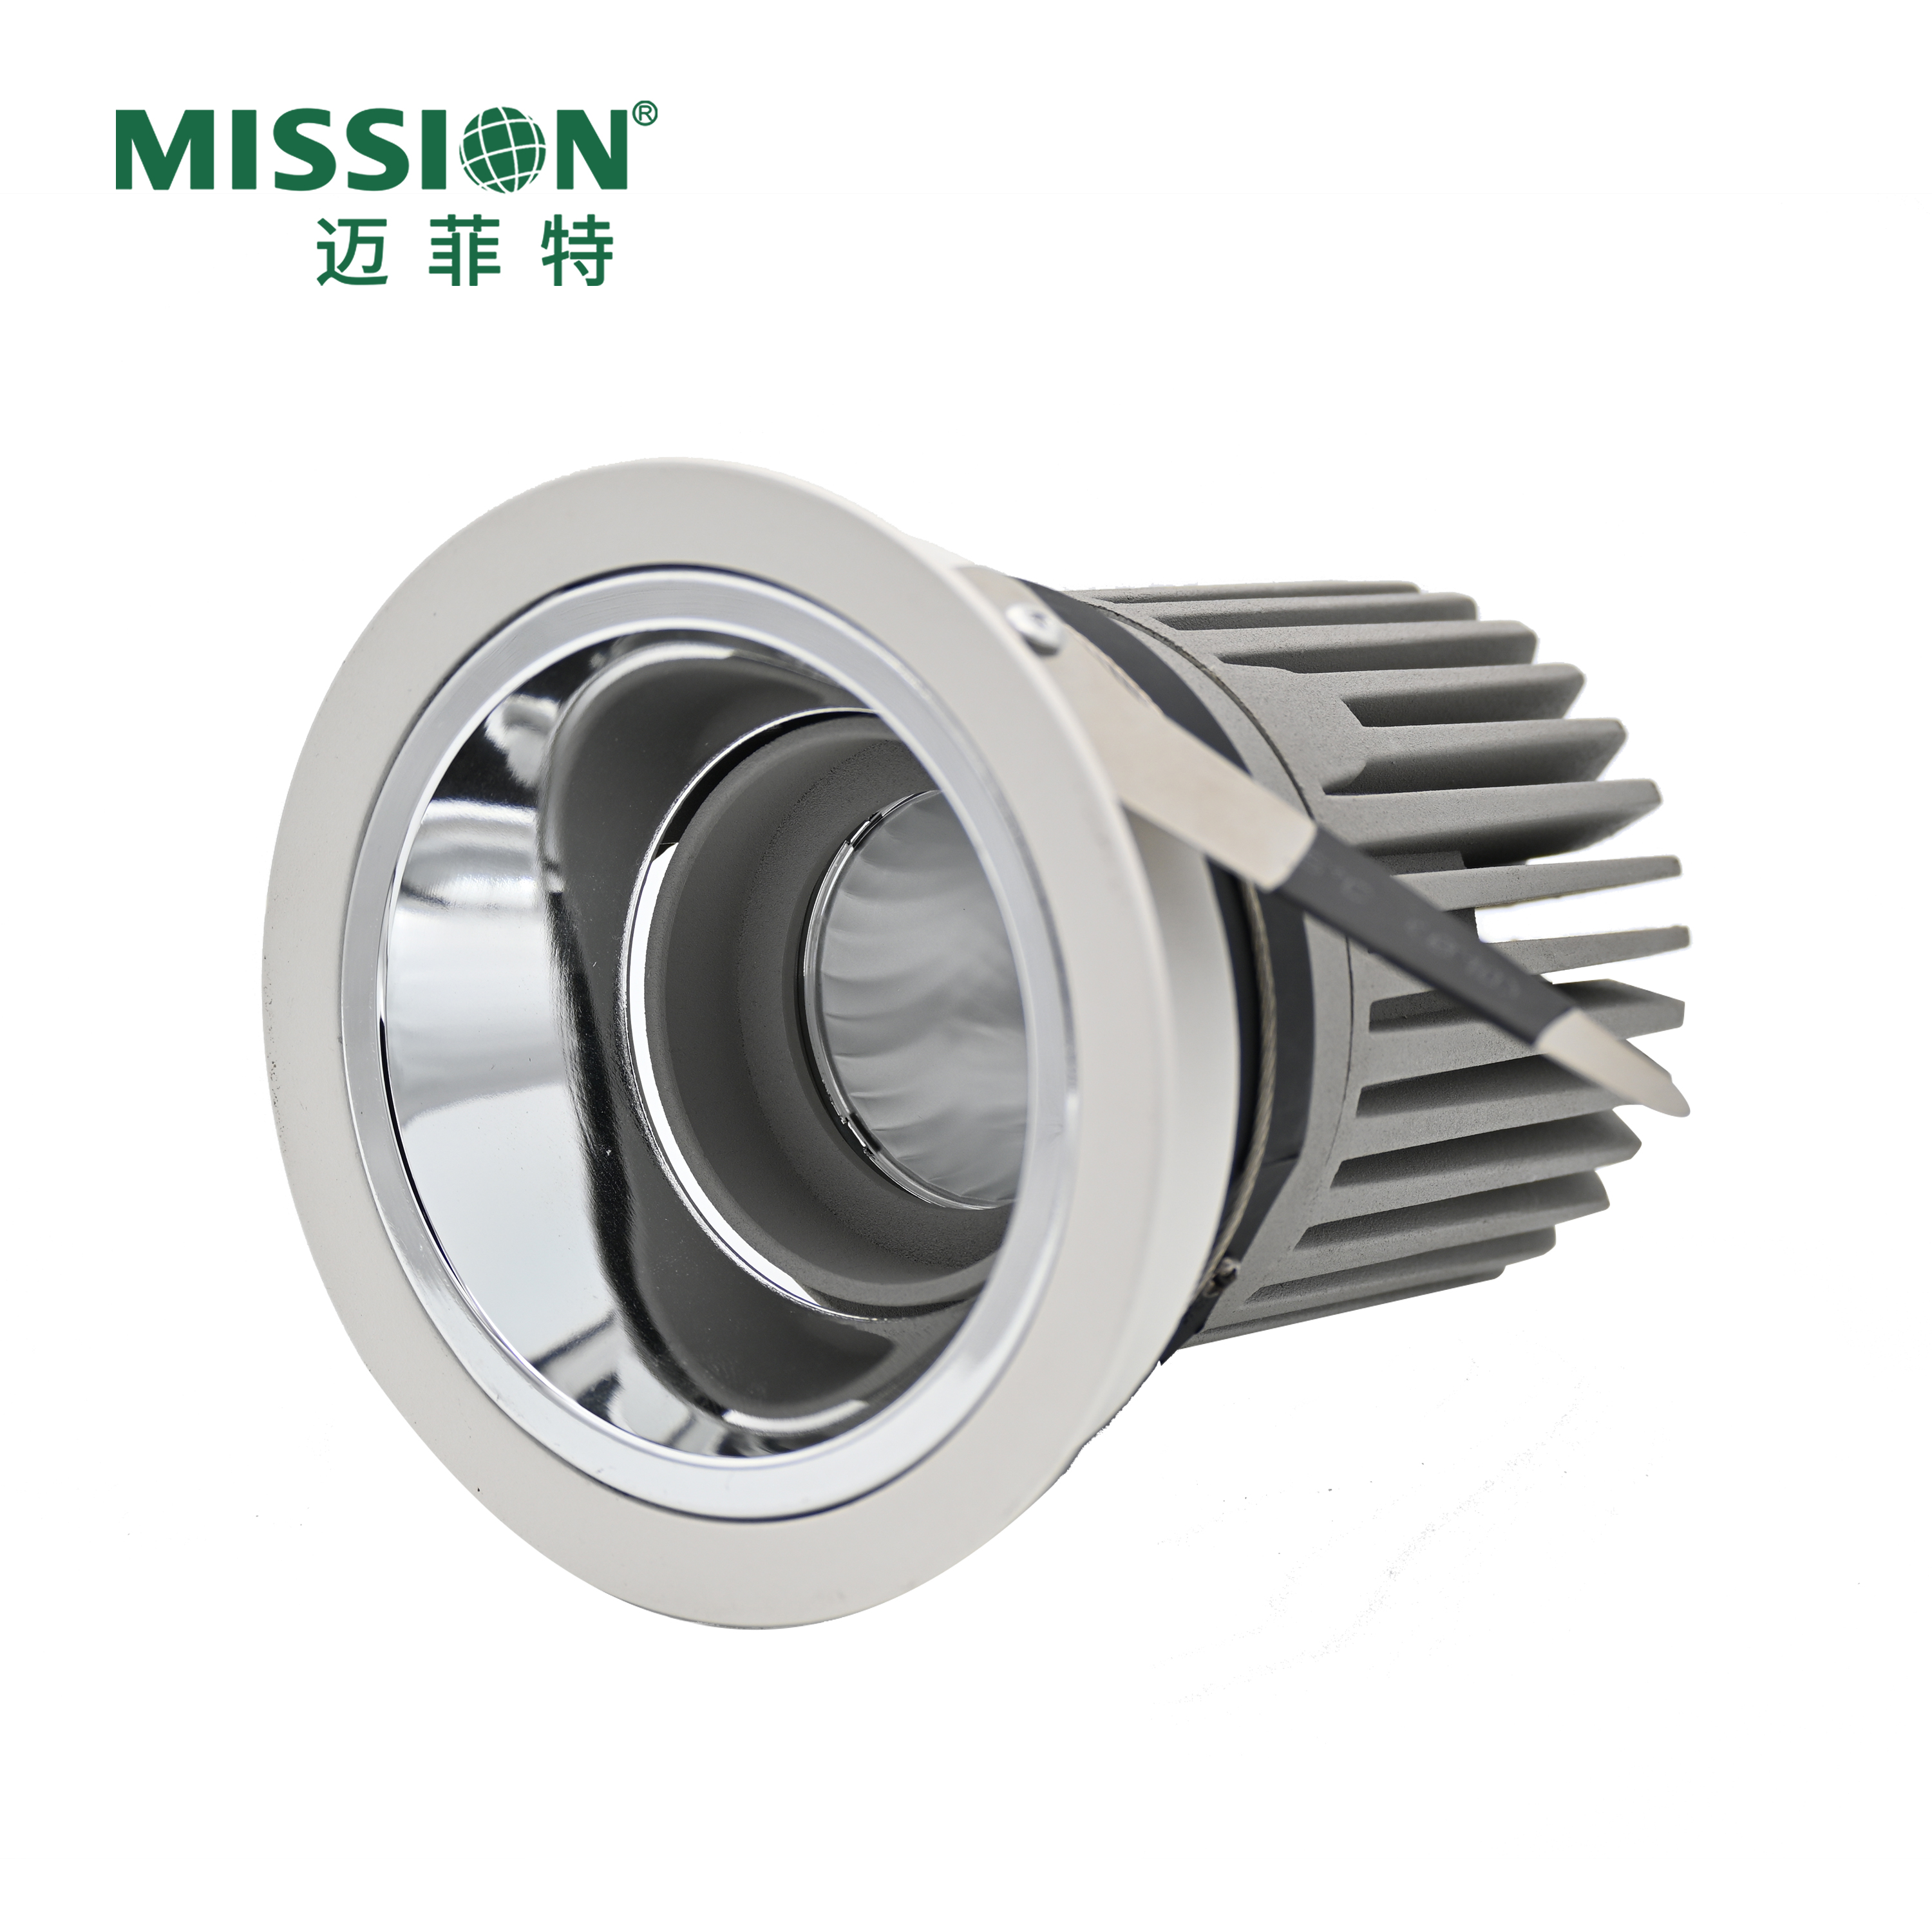 Manufacturers Selling Aluminum wall washer downlight Adjustable Wall Washer Downlight